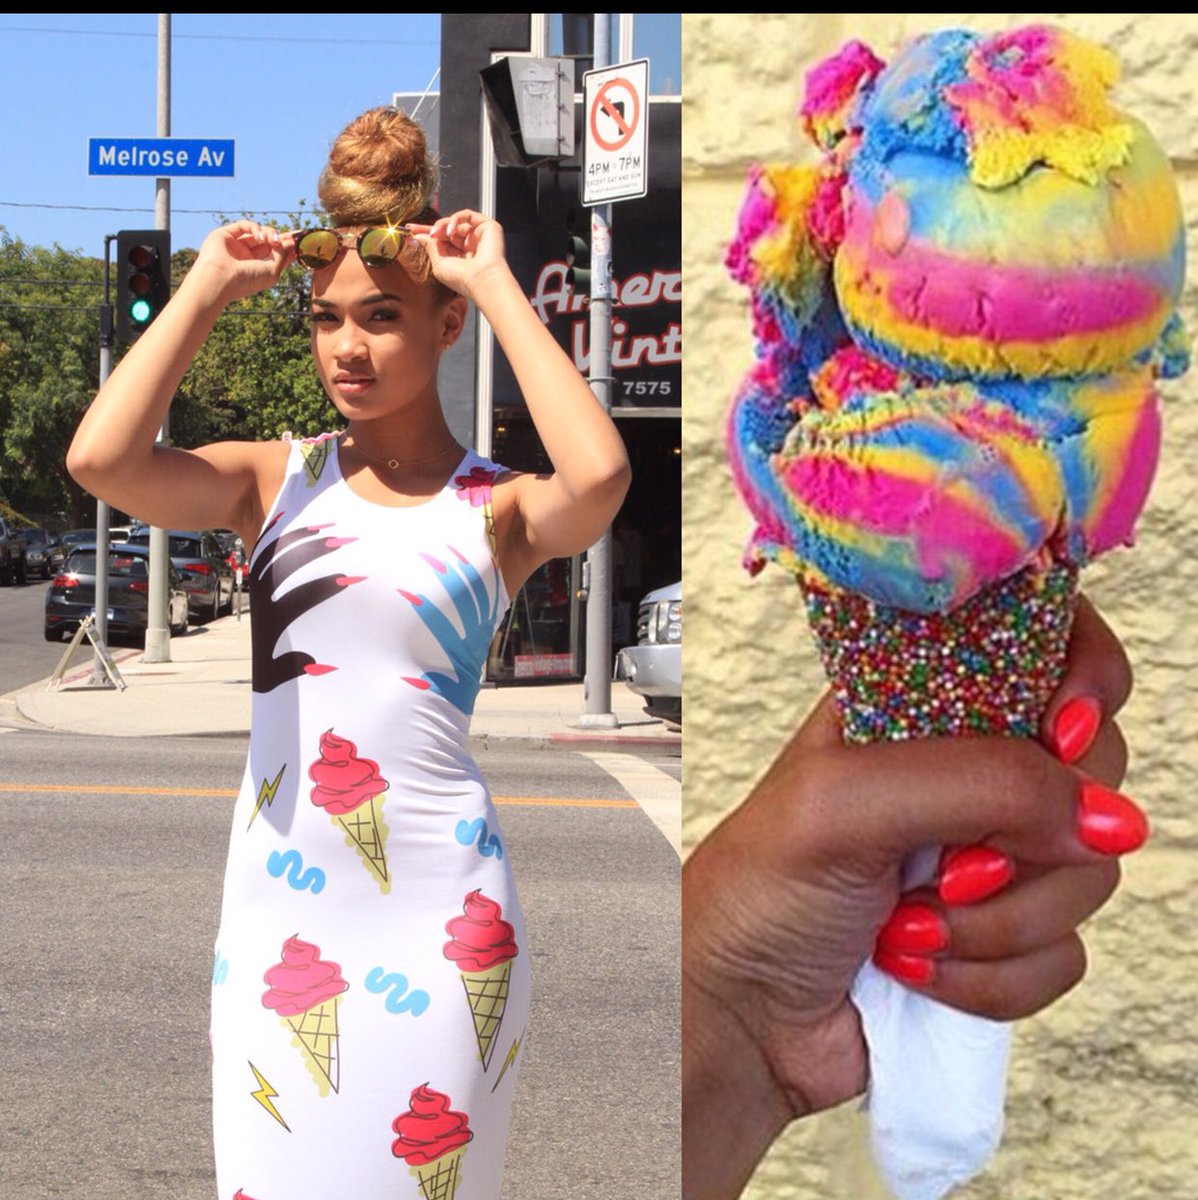 RT @PopGang101: Hot for the summer. Ice cream dreams and dresses.. Get your #IceCreamPaintJob dress now at https://t.co/hXdMZvQ3Fq https://…